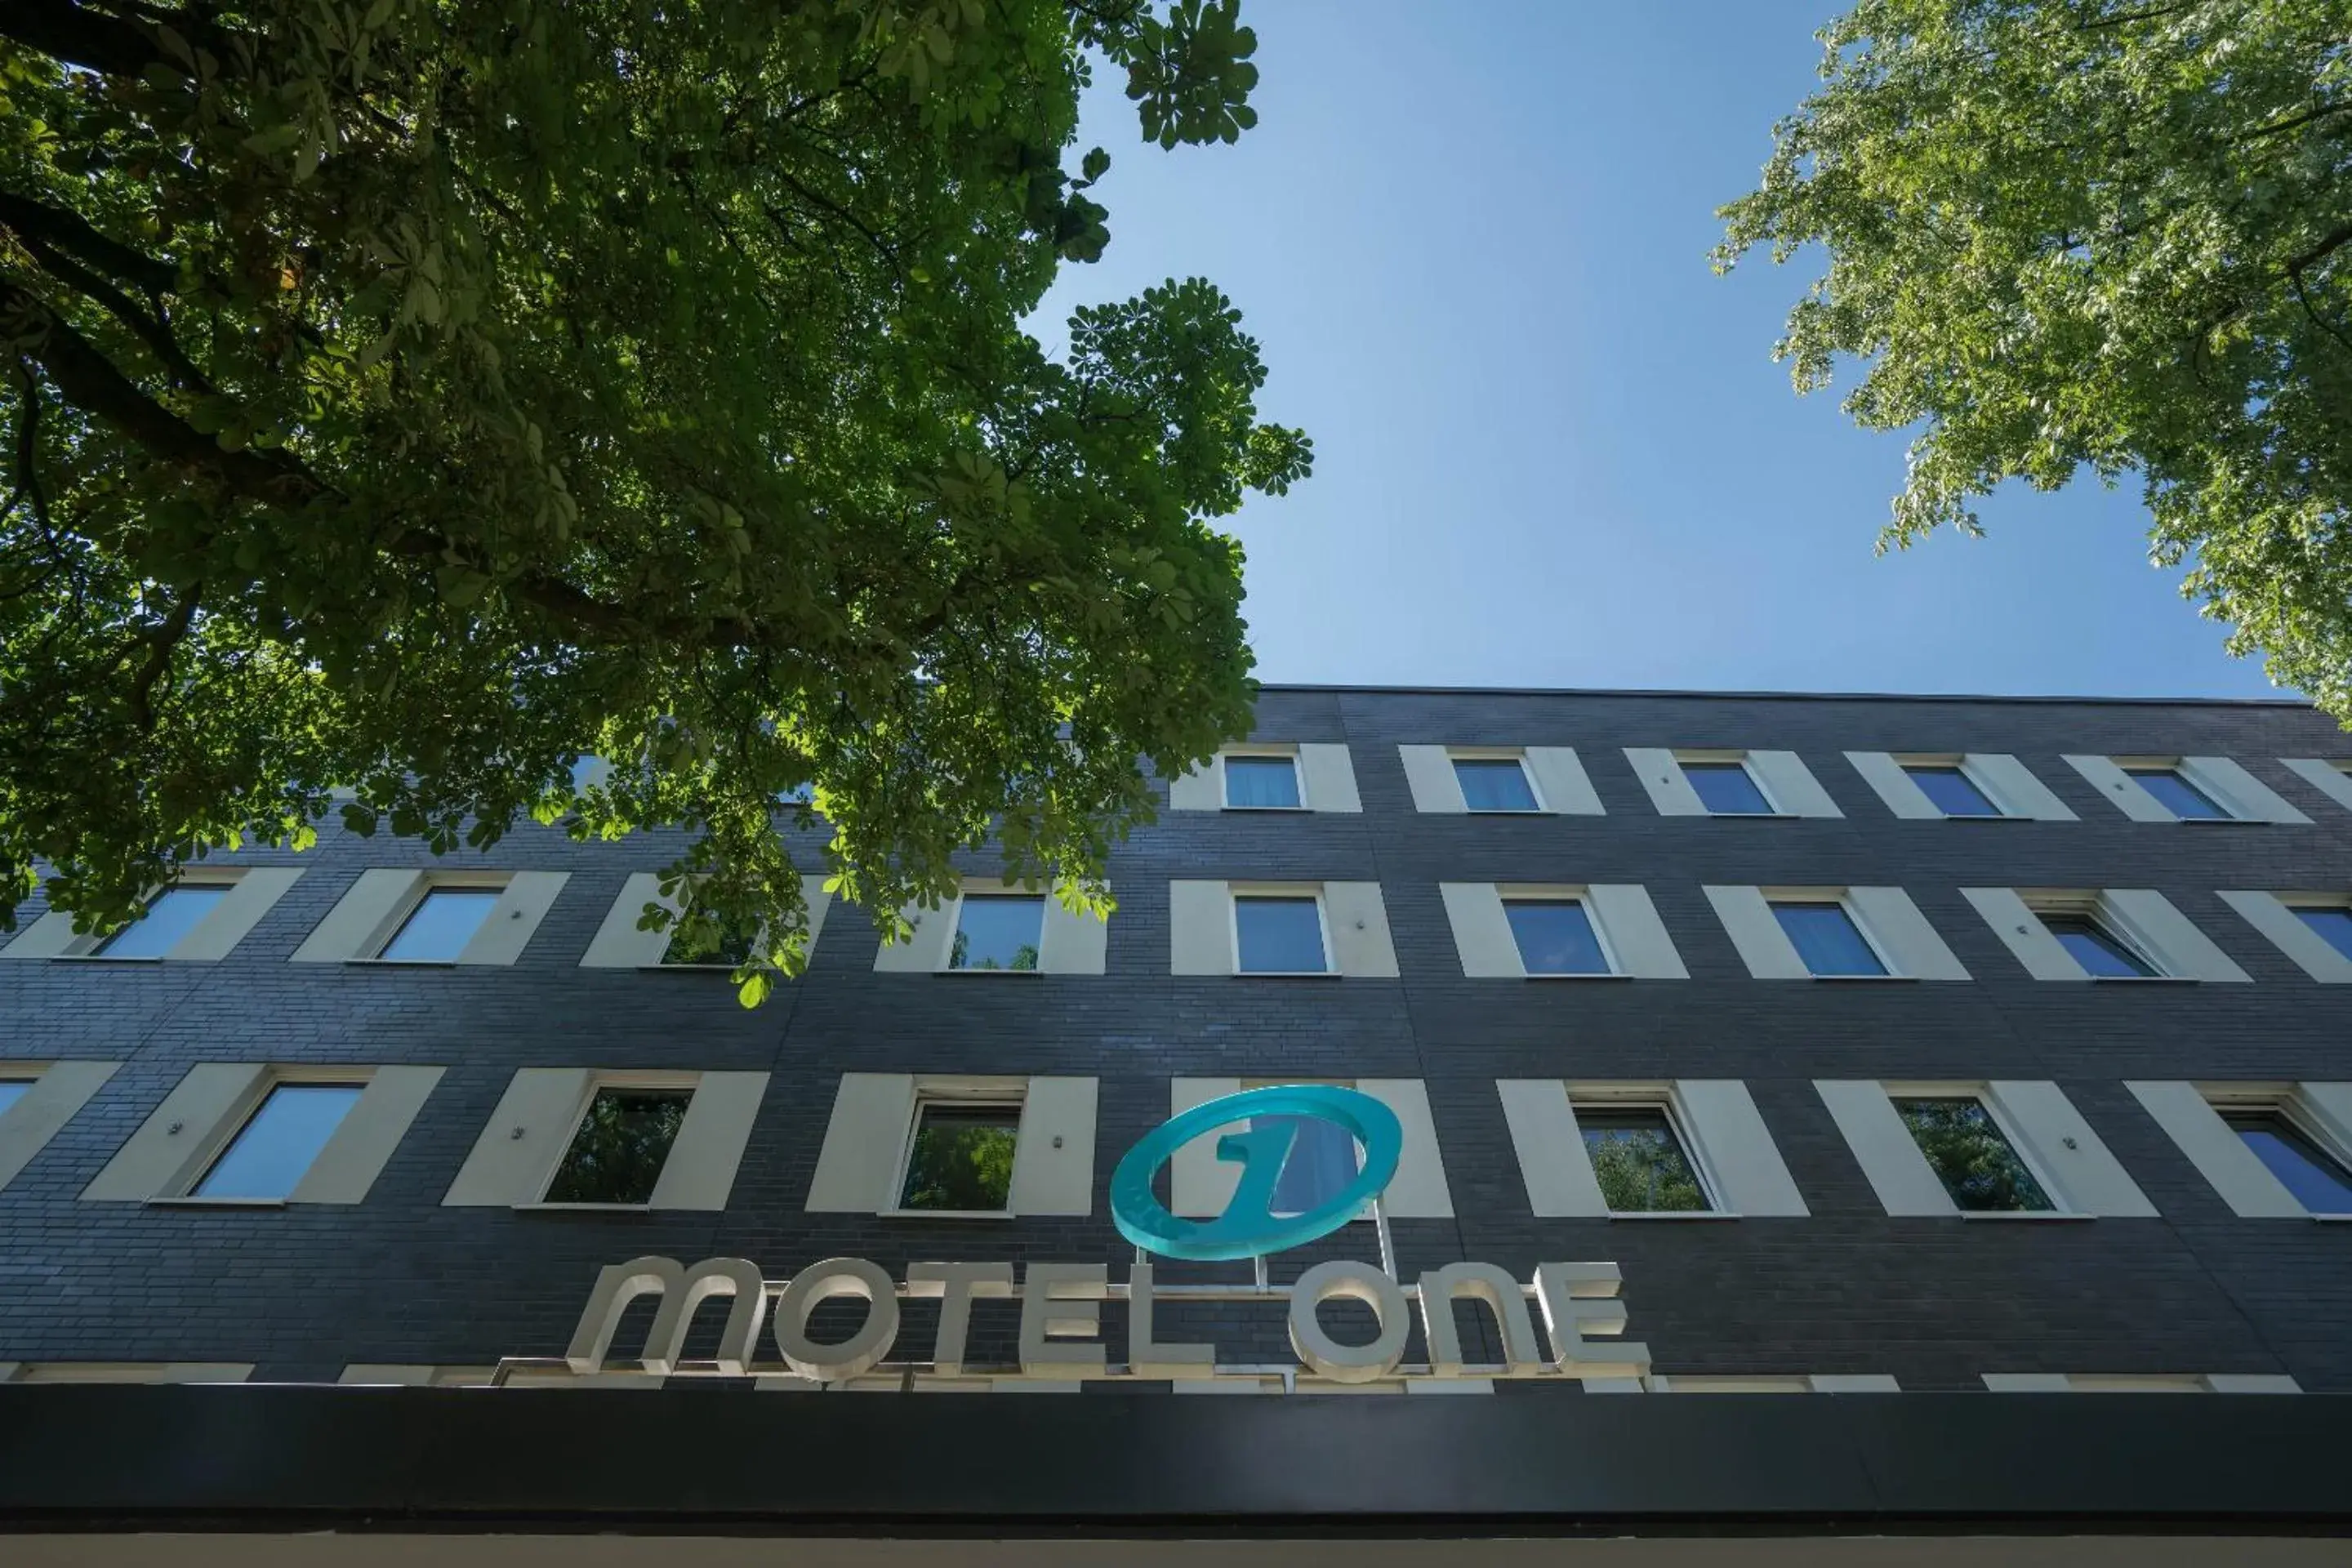 Property building in Motel One Hamburg Airport